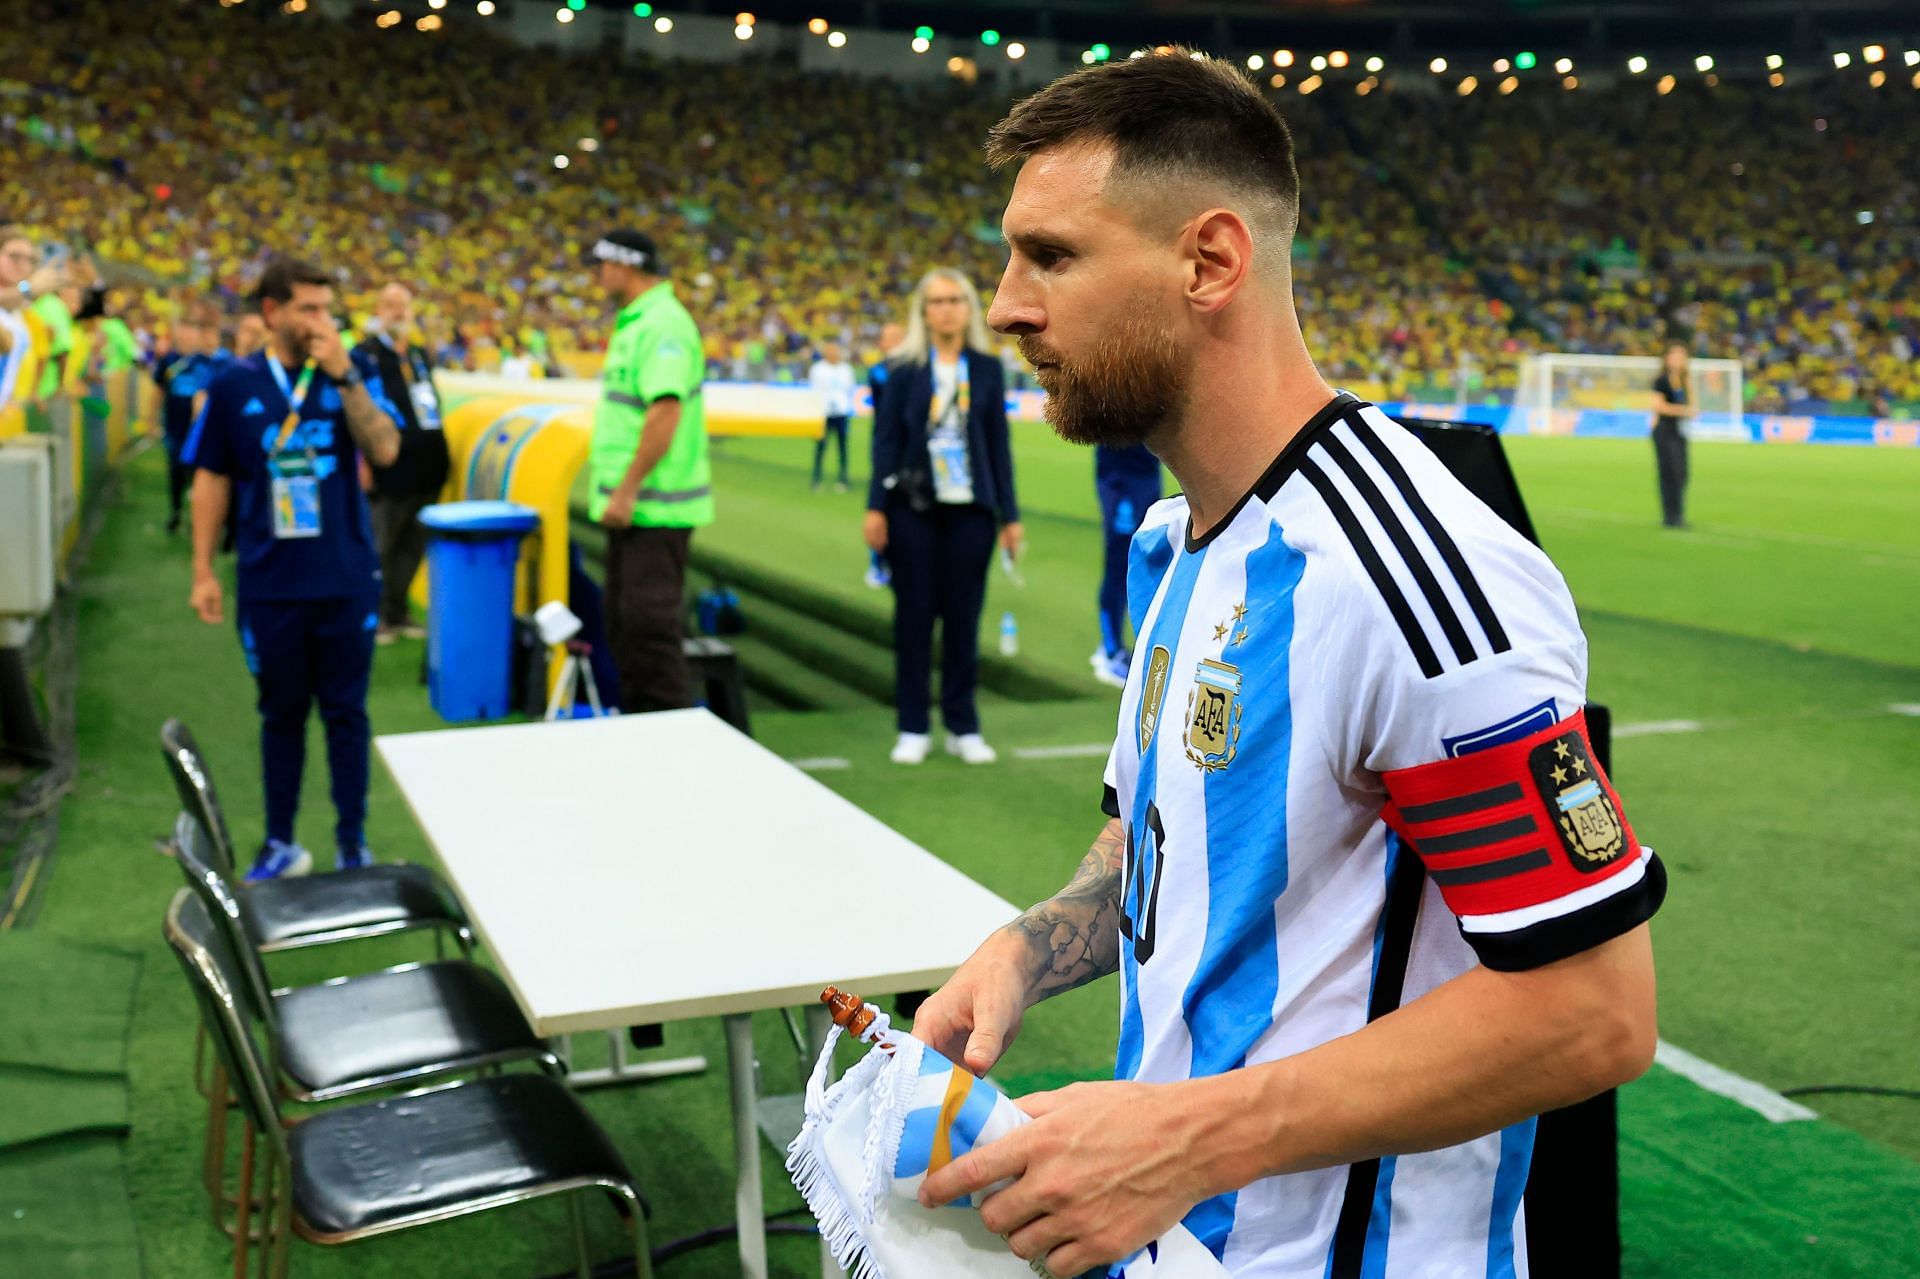 Lionel Messi to miss both Argentina games over international break to fully recover from hamstring injury: Reports